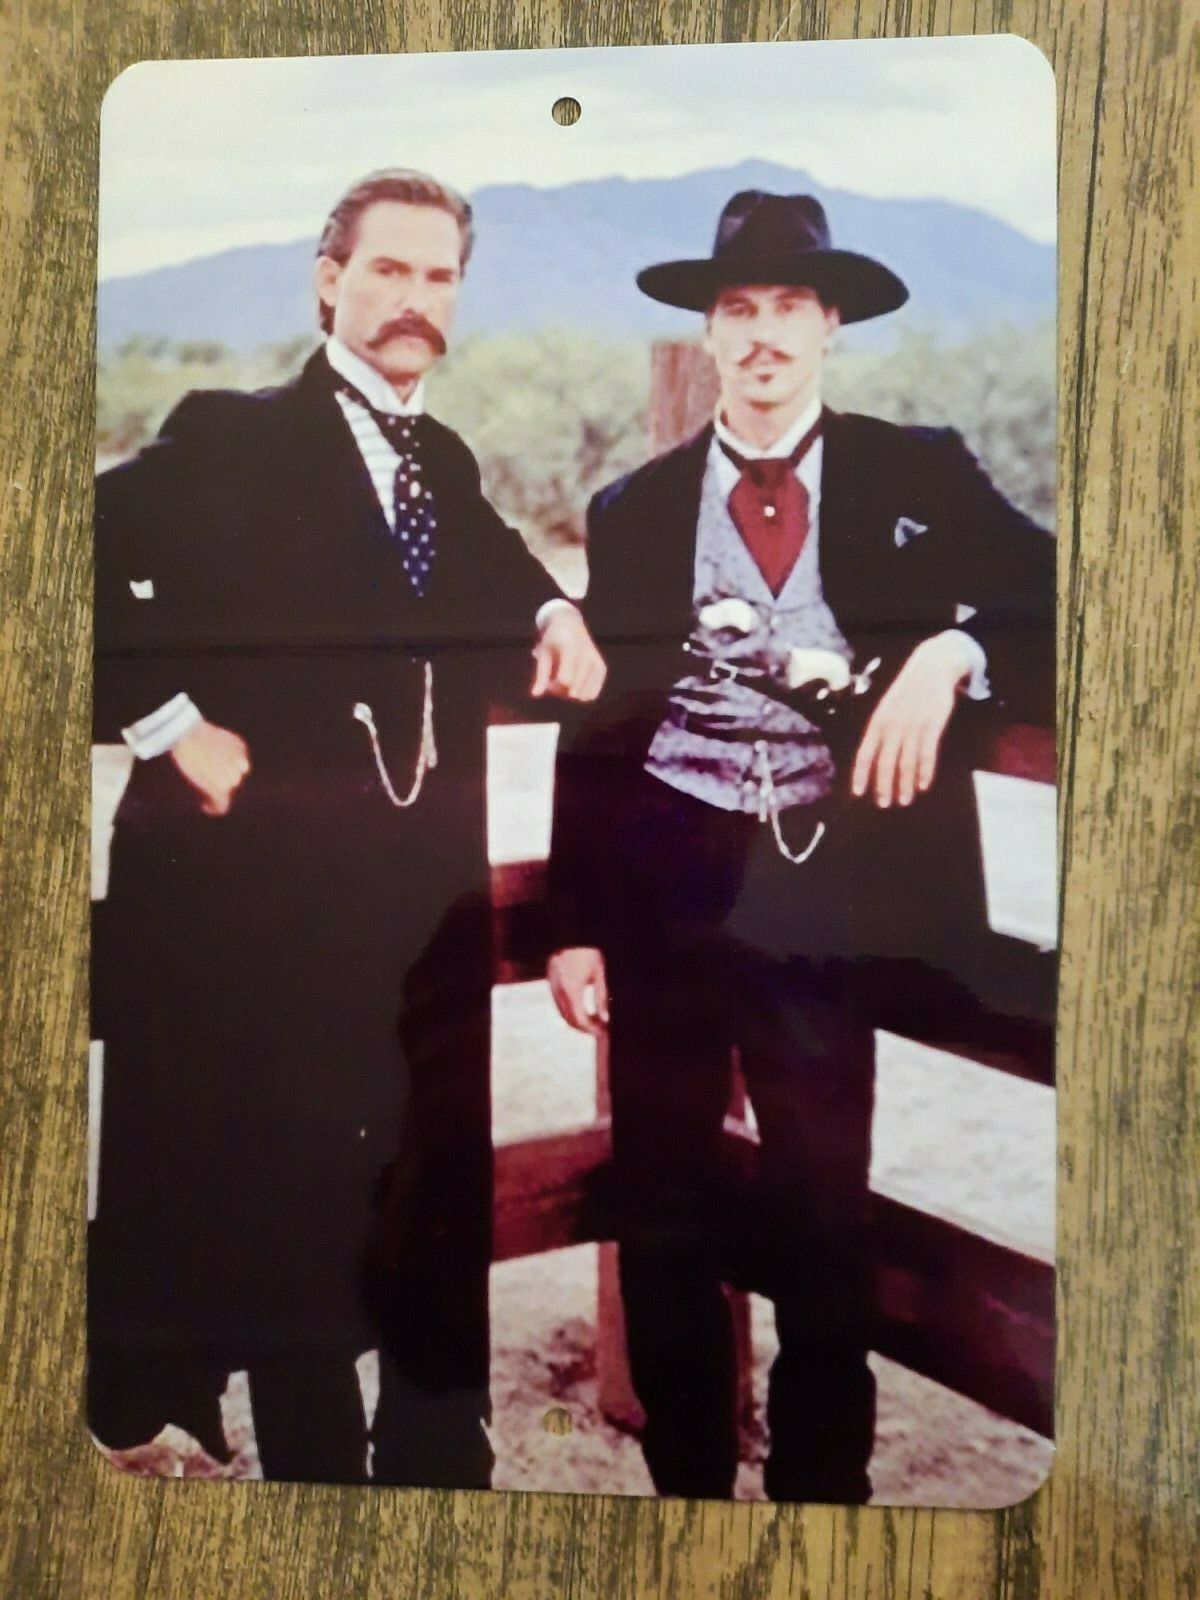 Tombstone Wyatt Earp and Doc Holliday 8x12 Metal Wall Sign Russell Kilmer